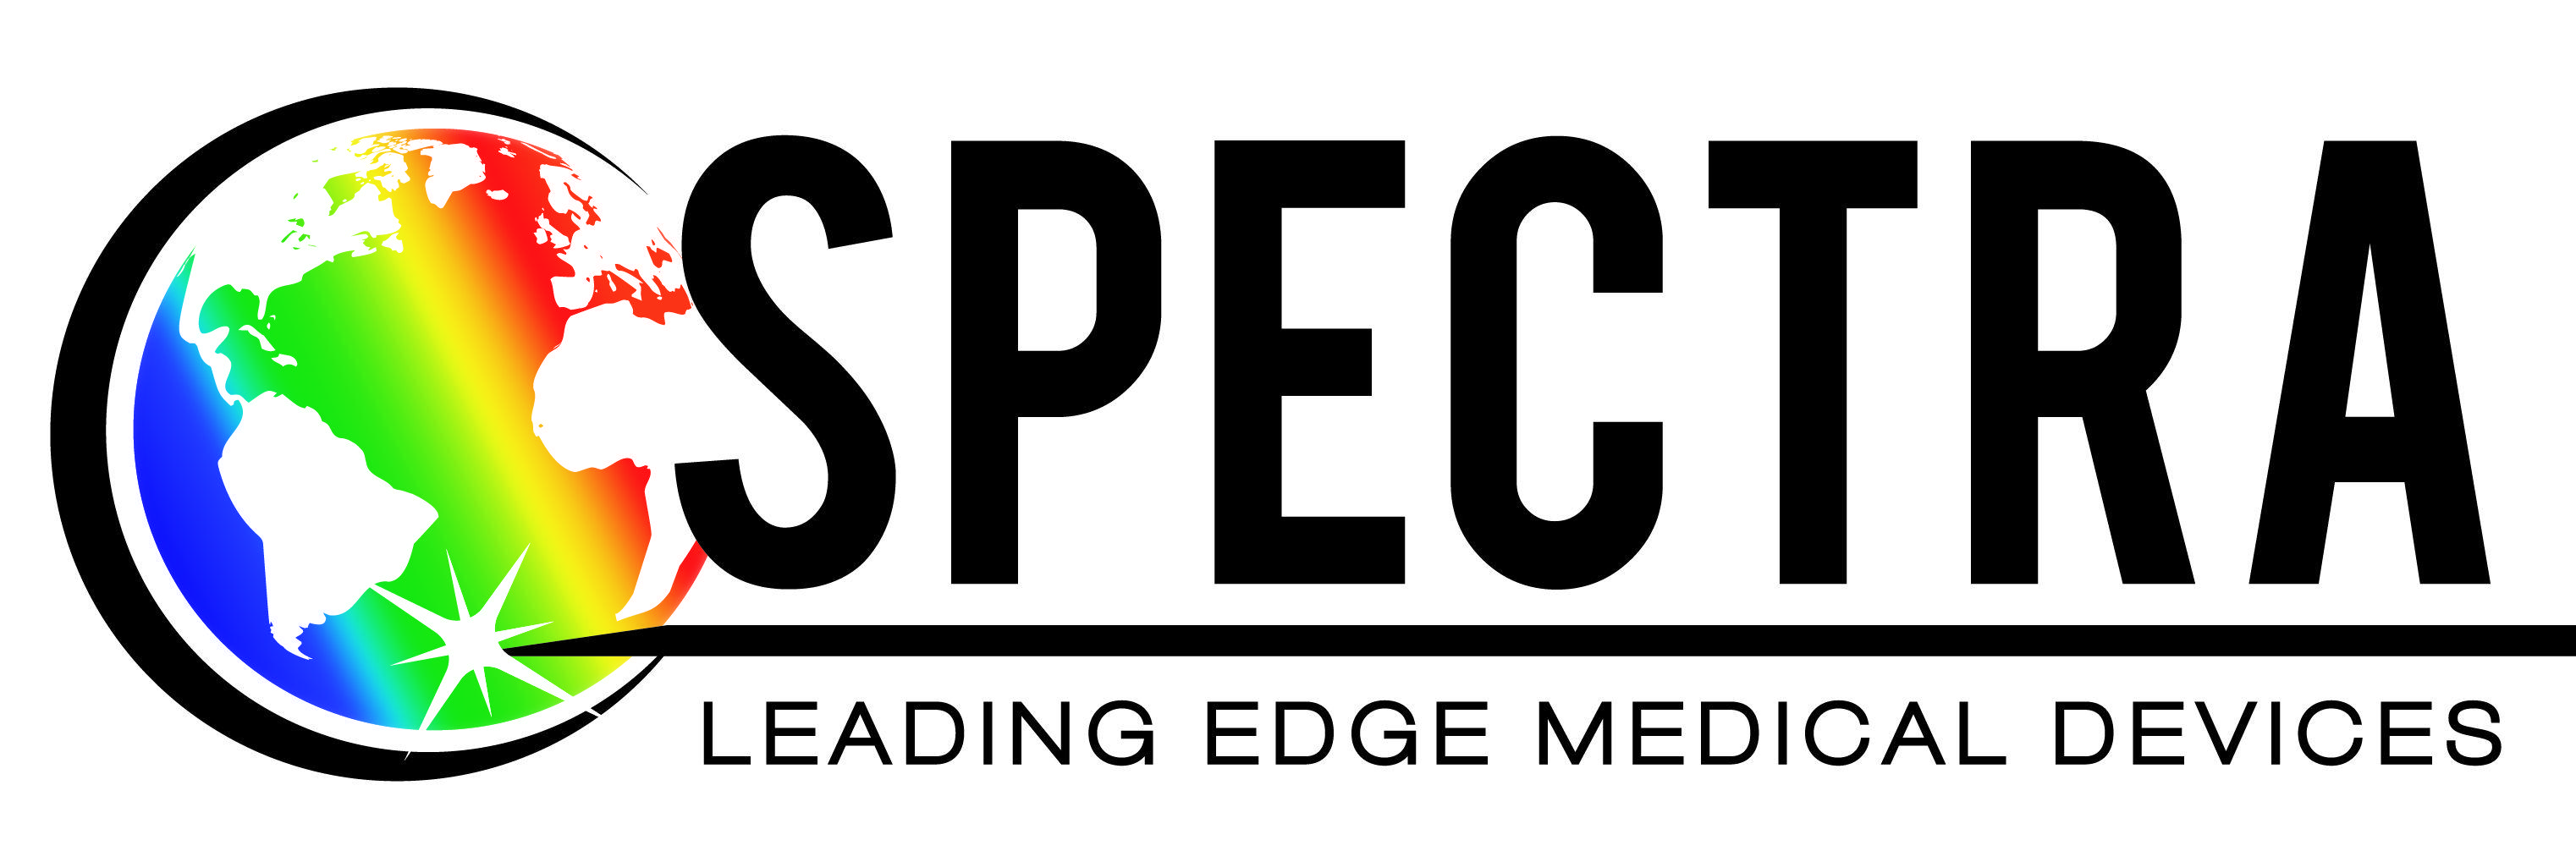 Spectra Logo - Leading Edge Medical Devices | Spectra Medical Devices